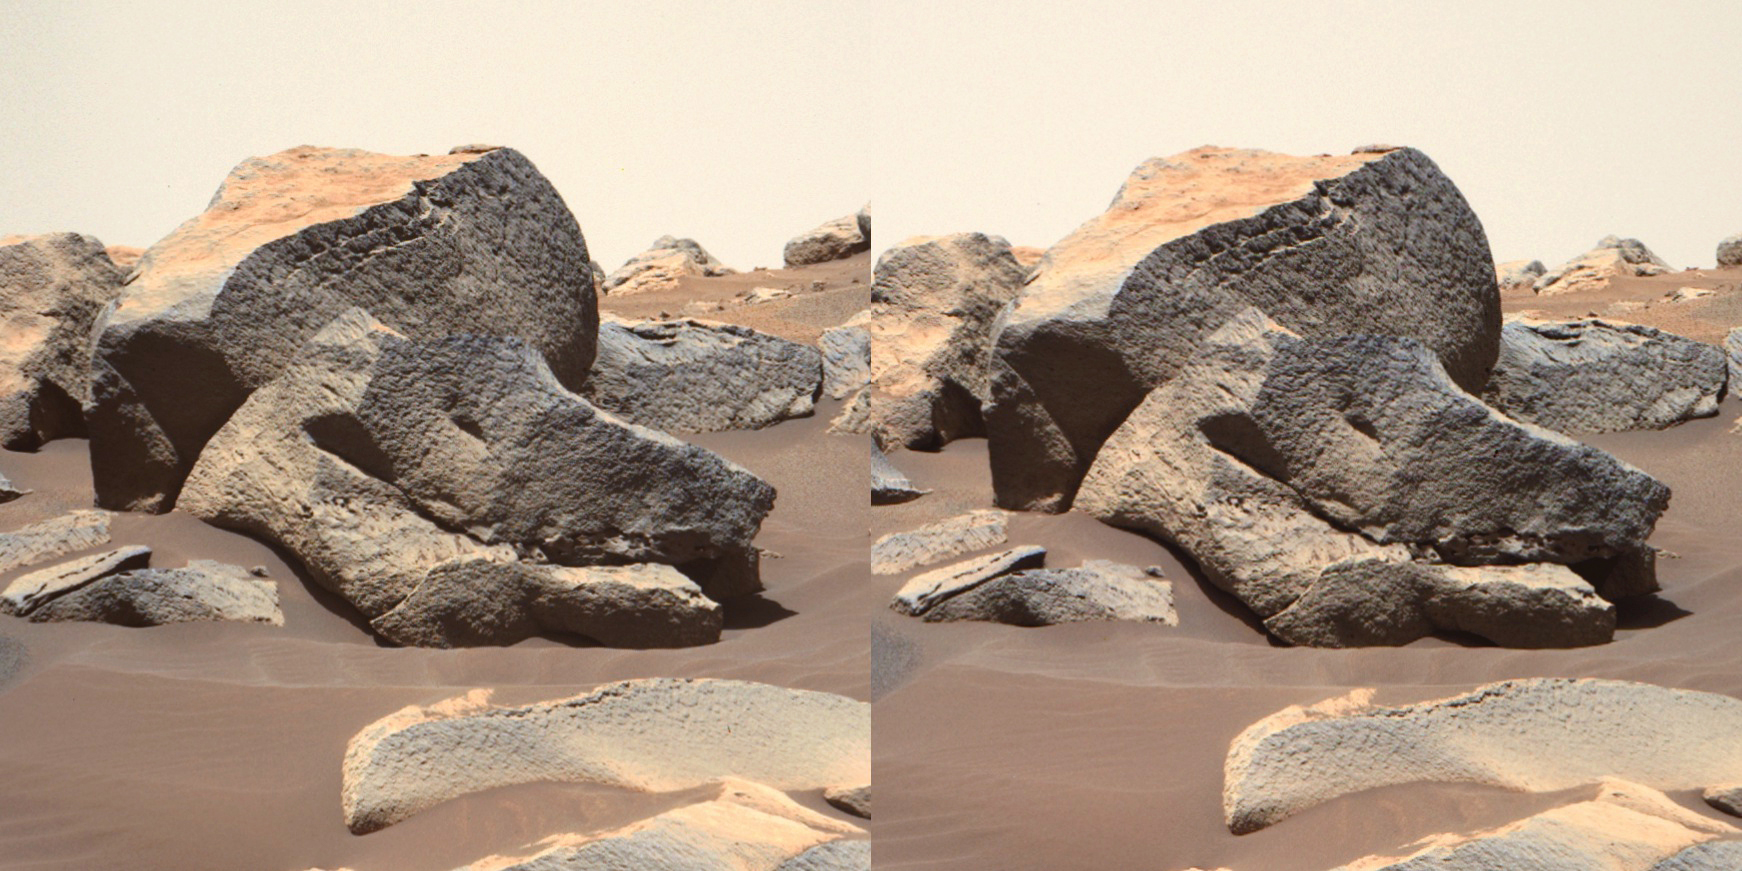 Martian rock shapes frequently resemble strange and familiar objects to the human eye. This one particularly recalls the head of a dinosaur, with a clearly identifiable jawline.